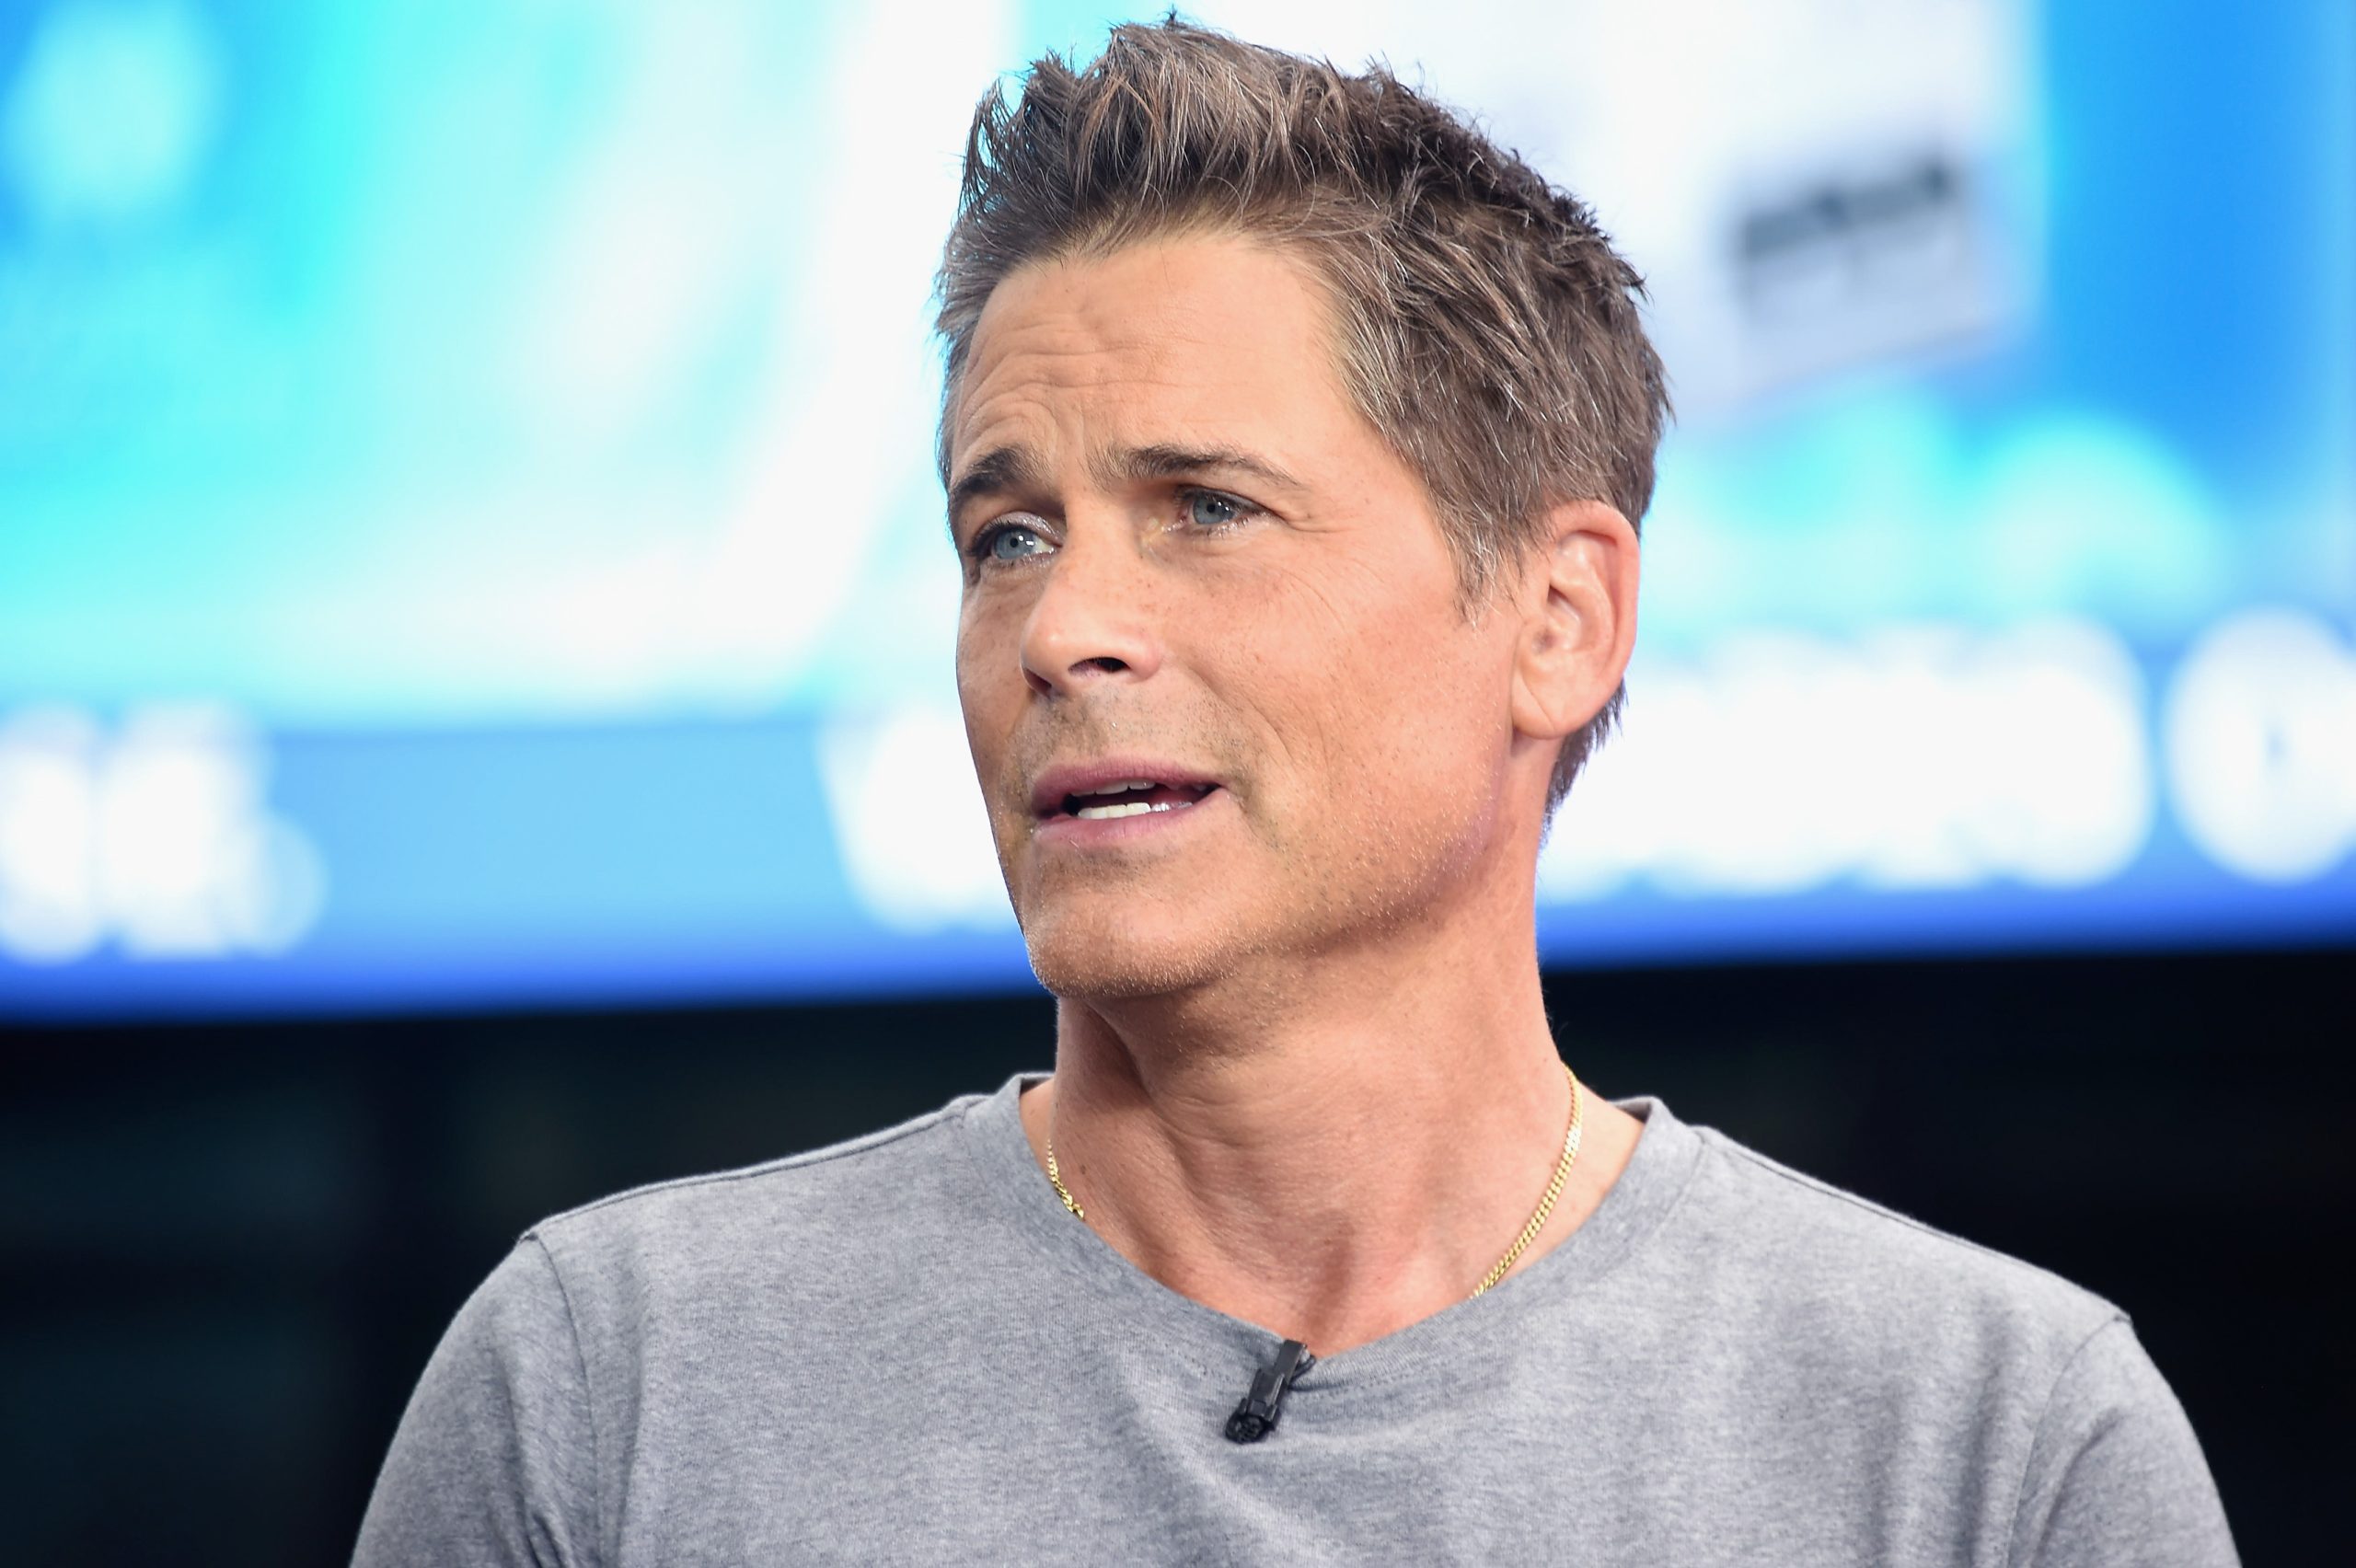 Rob Lowe Wiki, Bio, Age, Net Worth, and Other Facts - FactsFive.